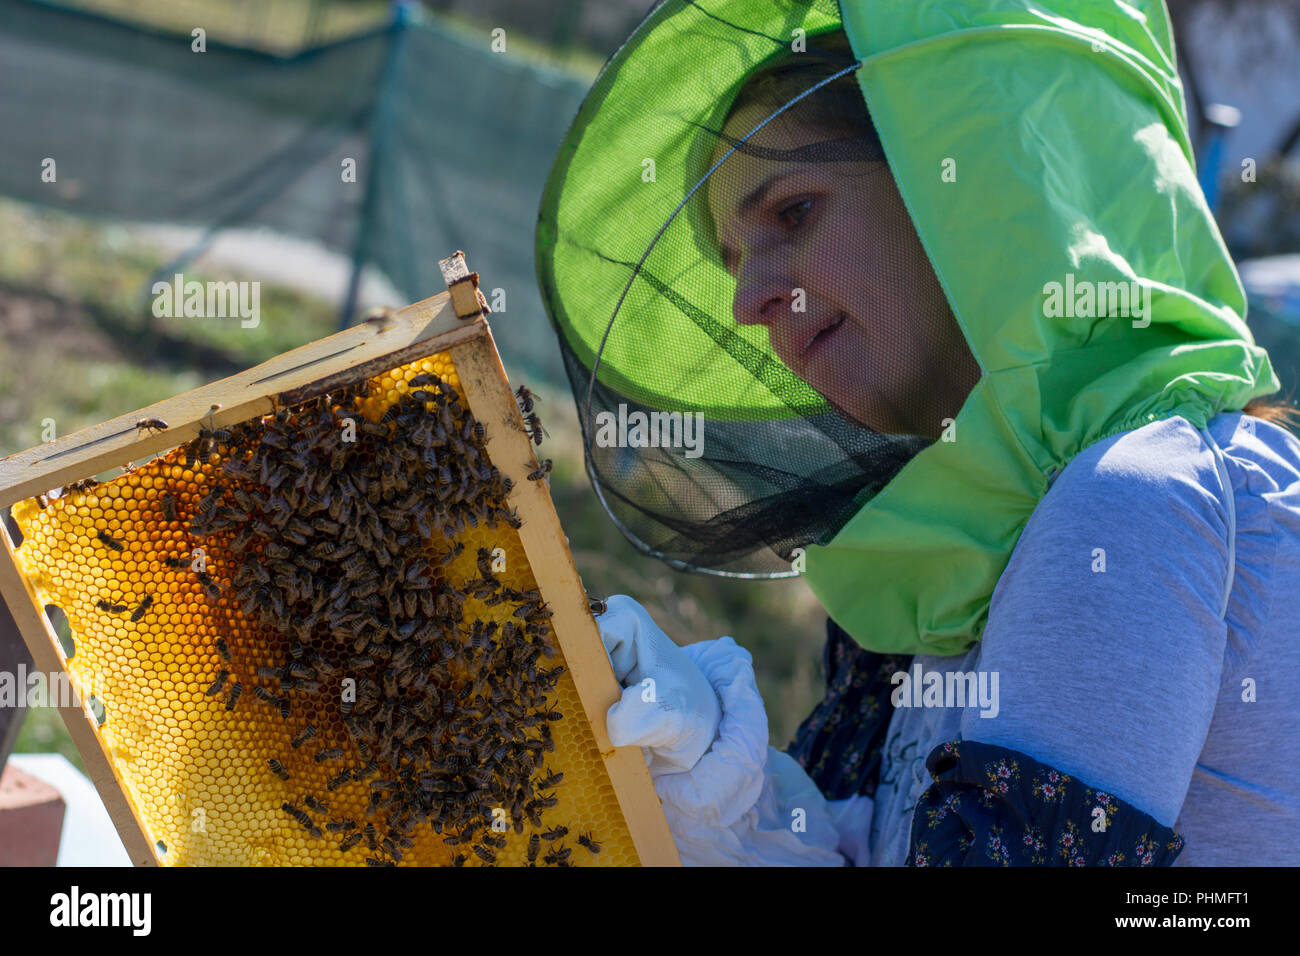 Female beekeeper controlling beehive and comb frame Stock Photo